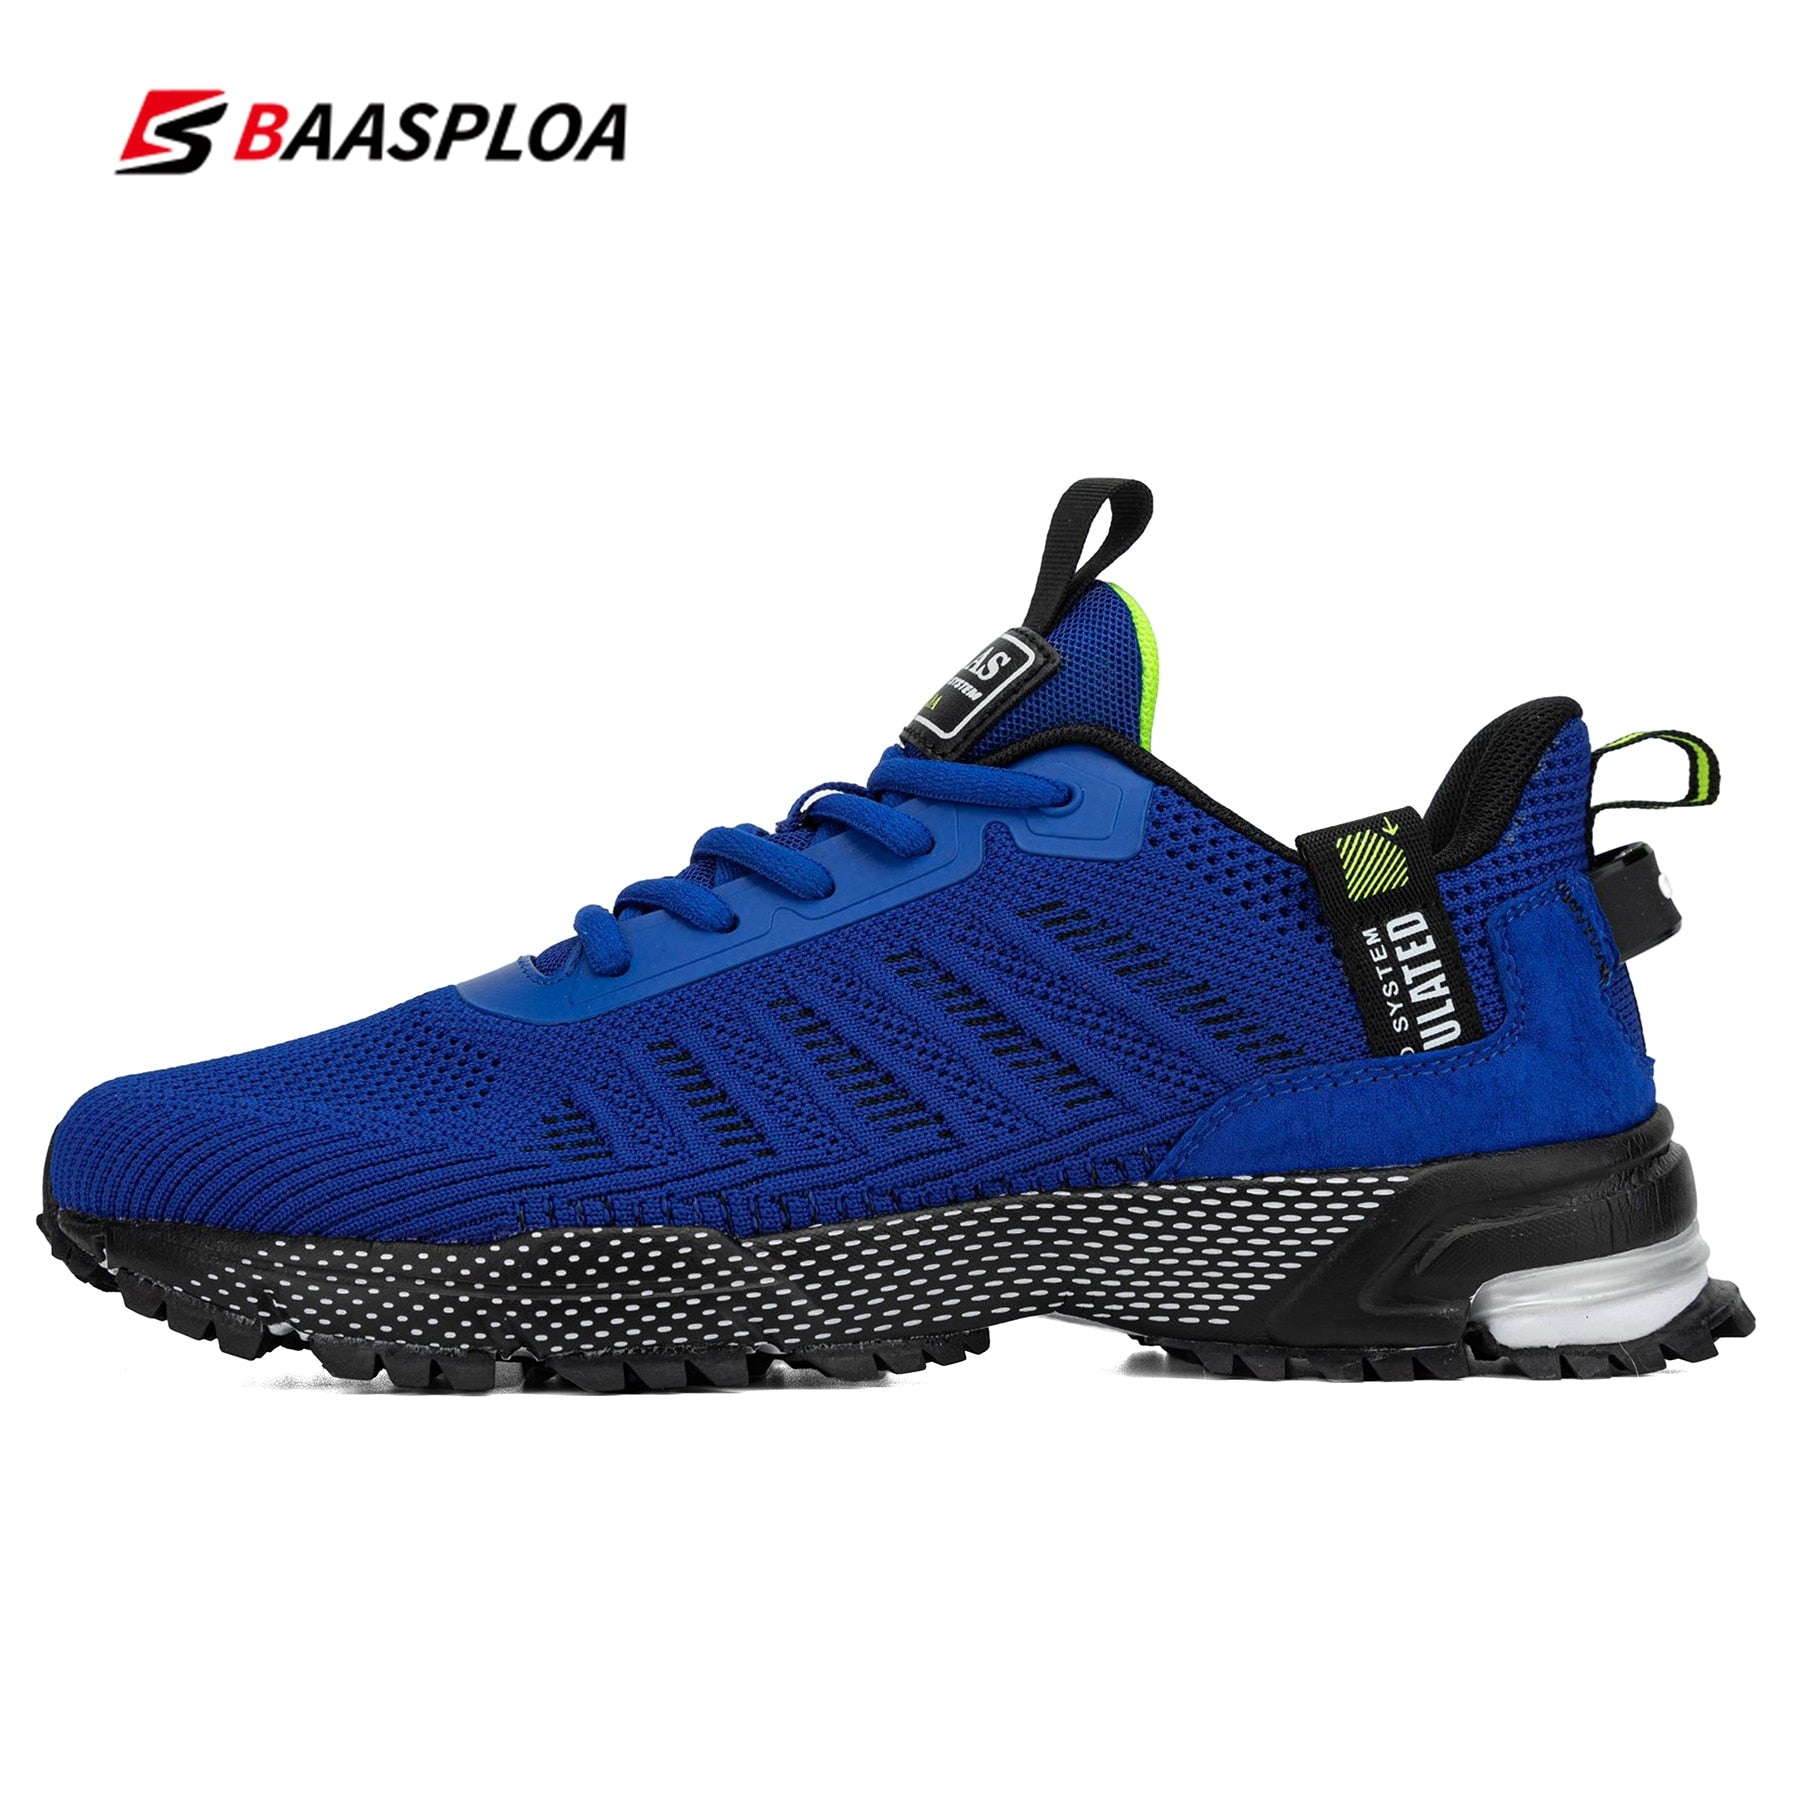 Buy a01-114101-bl Baasploa Professional Lightweight Running Shoes for Men